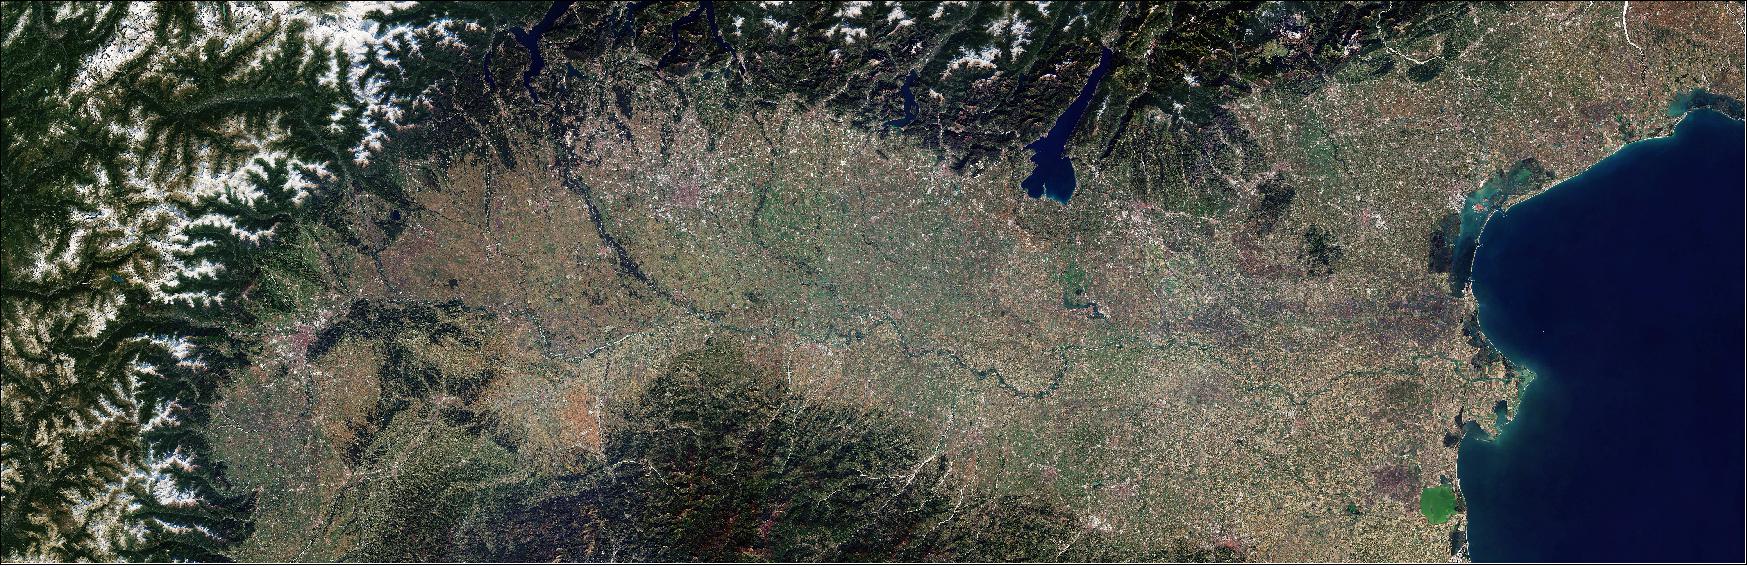 Figure 31: Image of the Po Valley, the most densely populated area in Italy, accounting for nearly half of the national population. This composite image contains several images captured between June 2018 and February 2019, allowing us to see the area free from clouds and smog. This image is also featured on the Earth from Space video program (image credit: ESA, the image contains modified Copernicus Sentinel data (2018–19), processed by ESA, CC BY-SA 3.0 IGO)